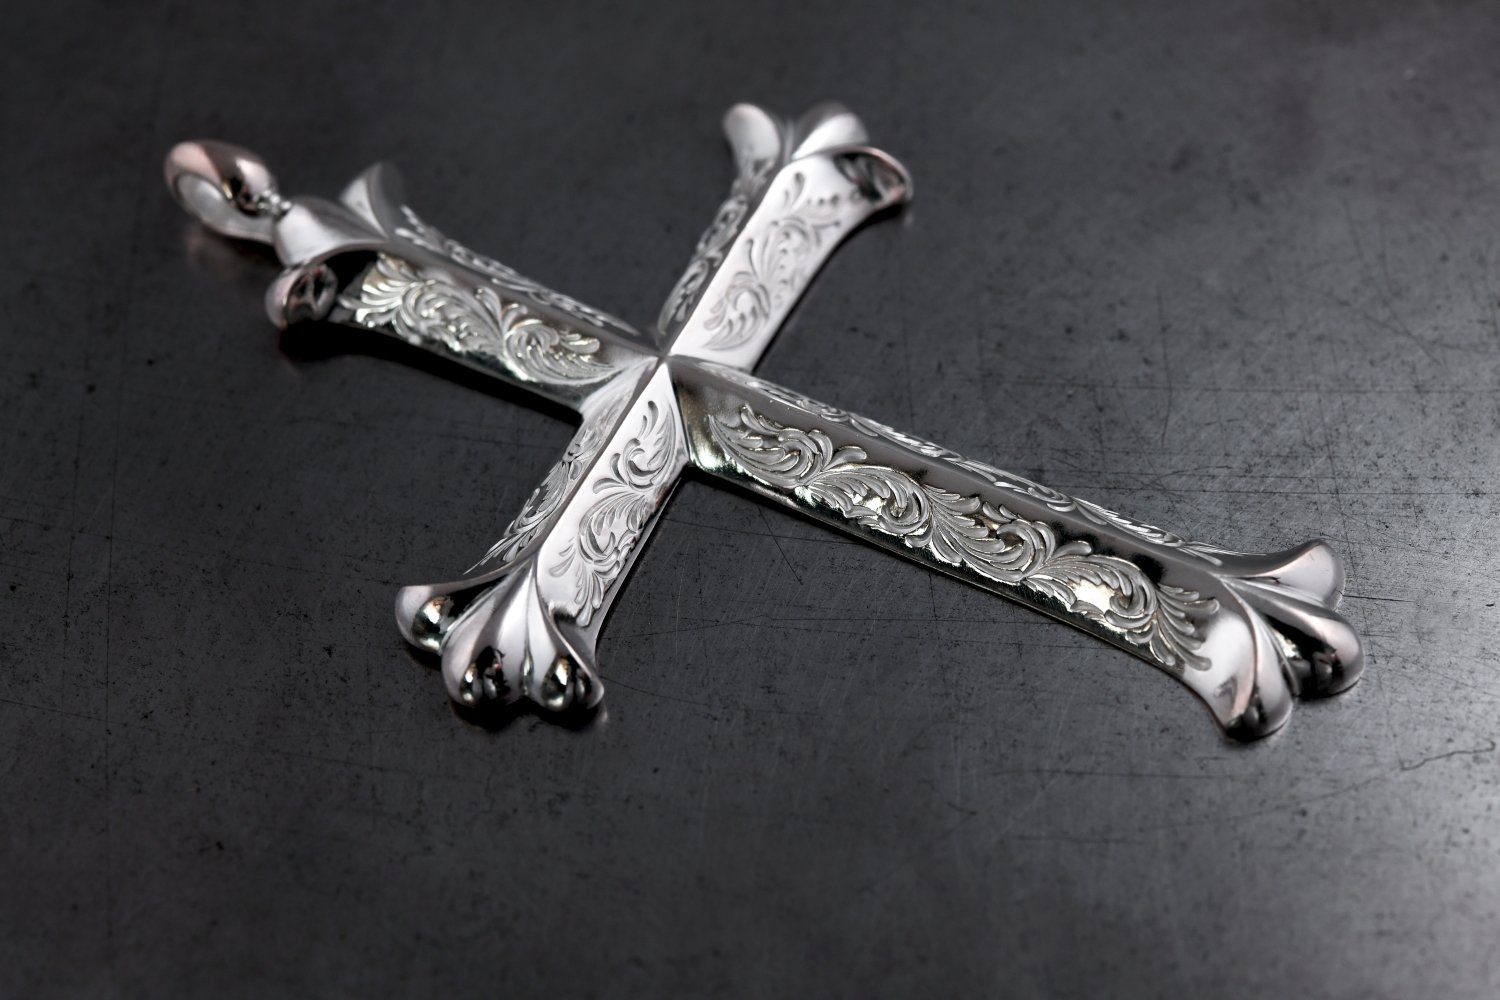 Hand engraved Silver cross